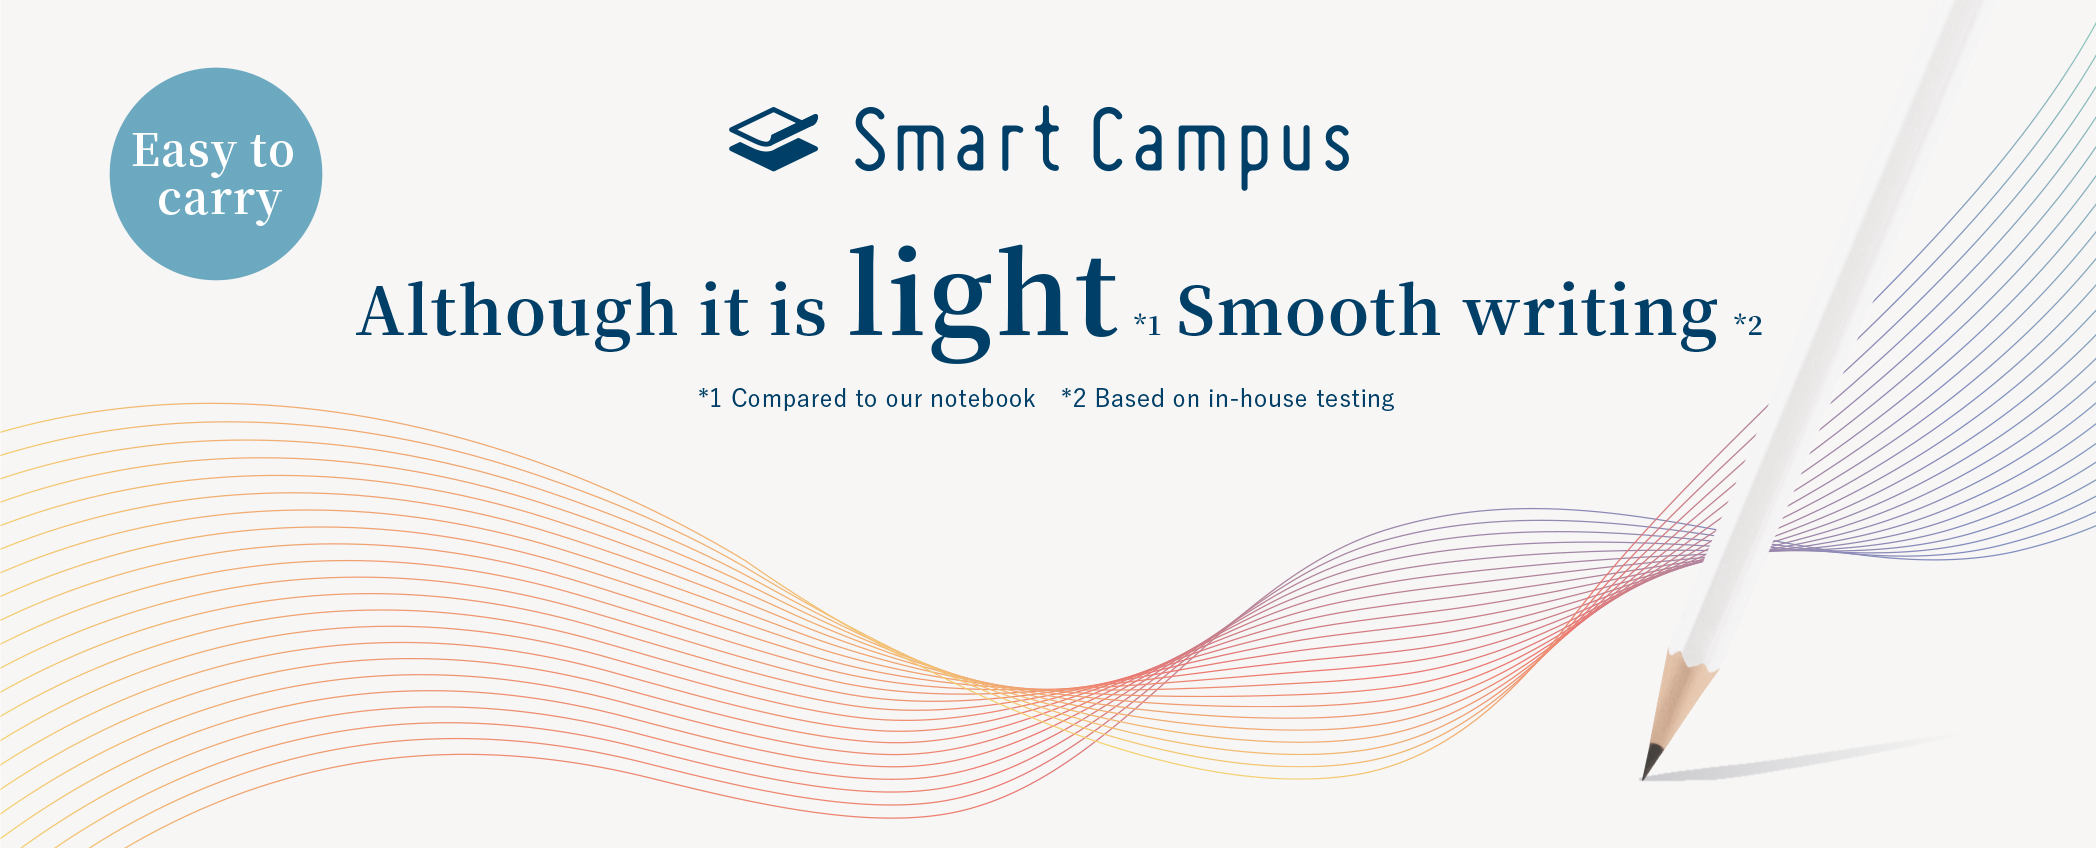 Smart Campus Light yet smooth writing experience